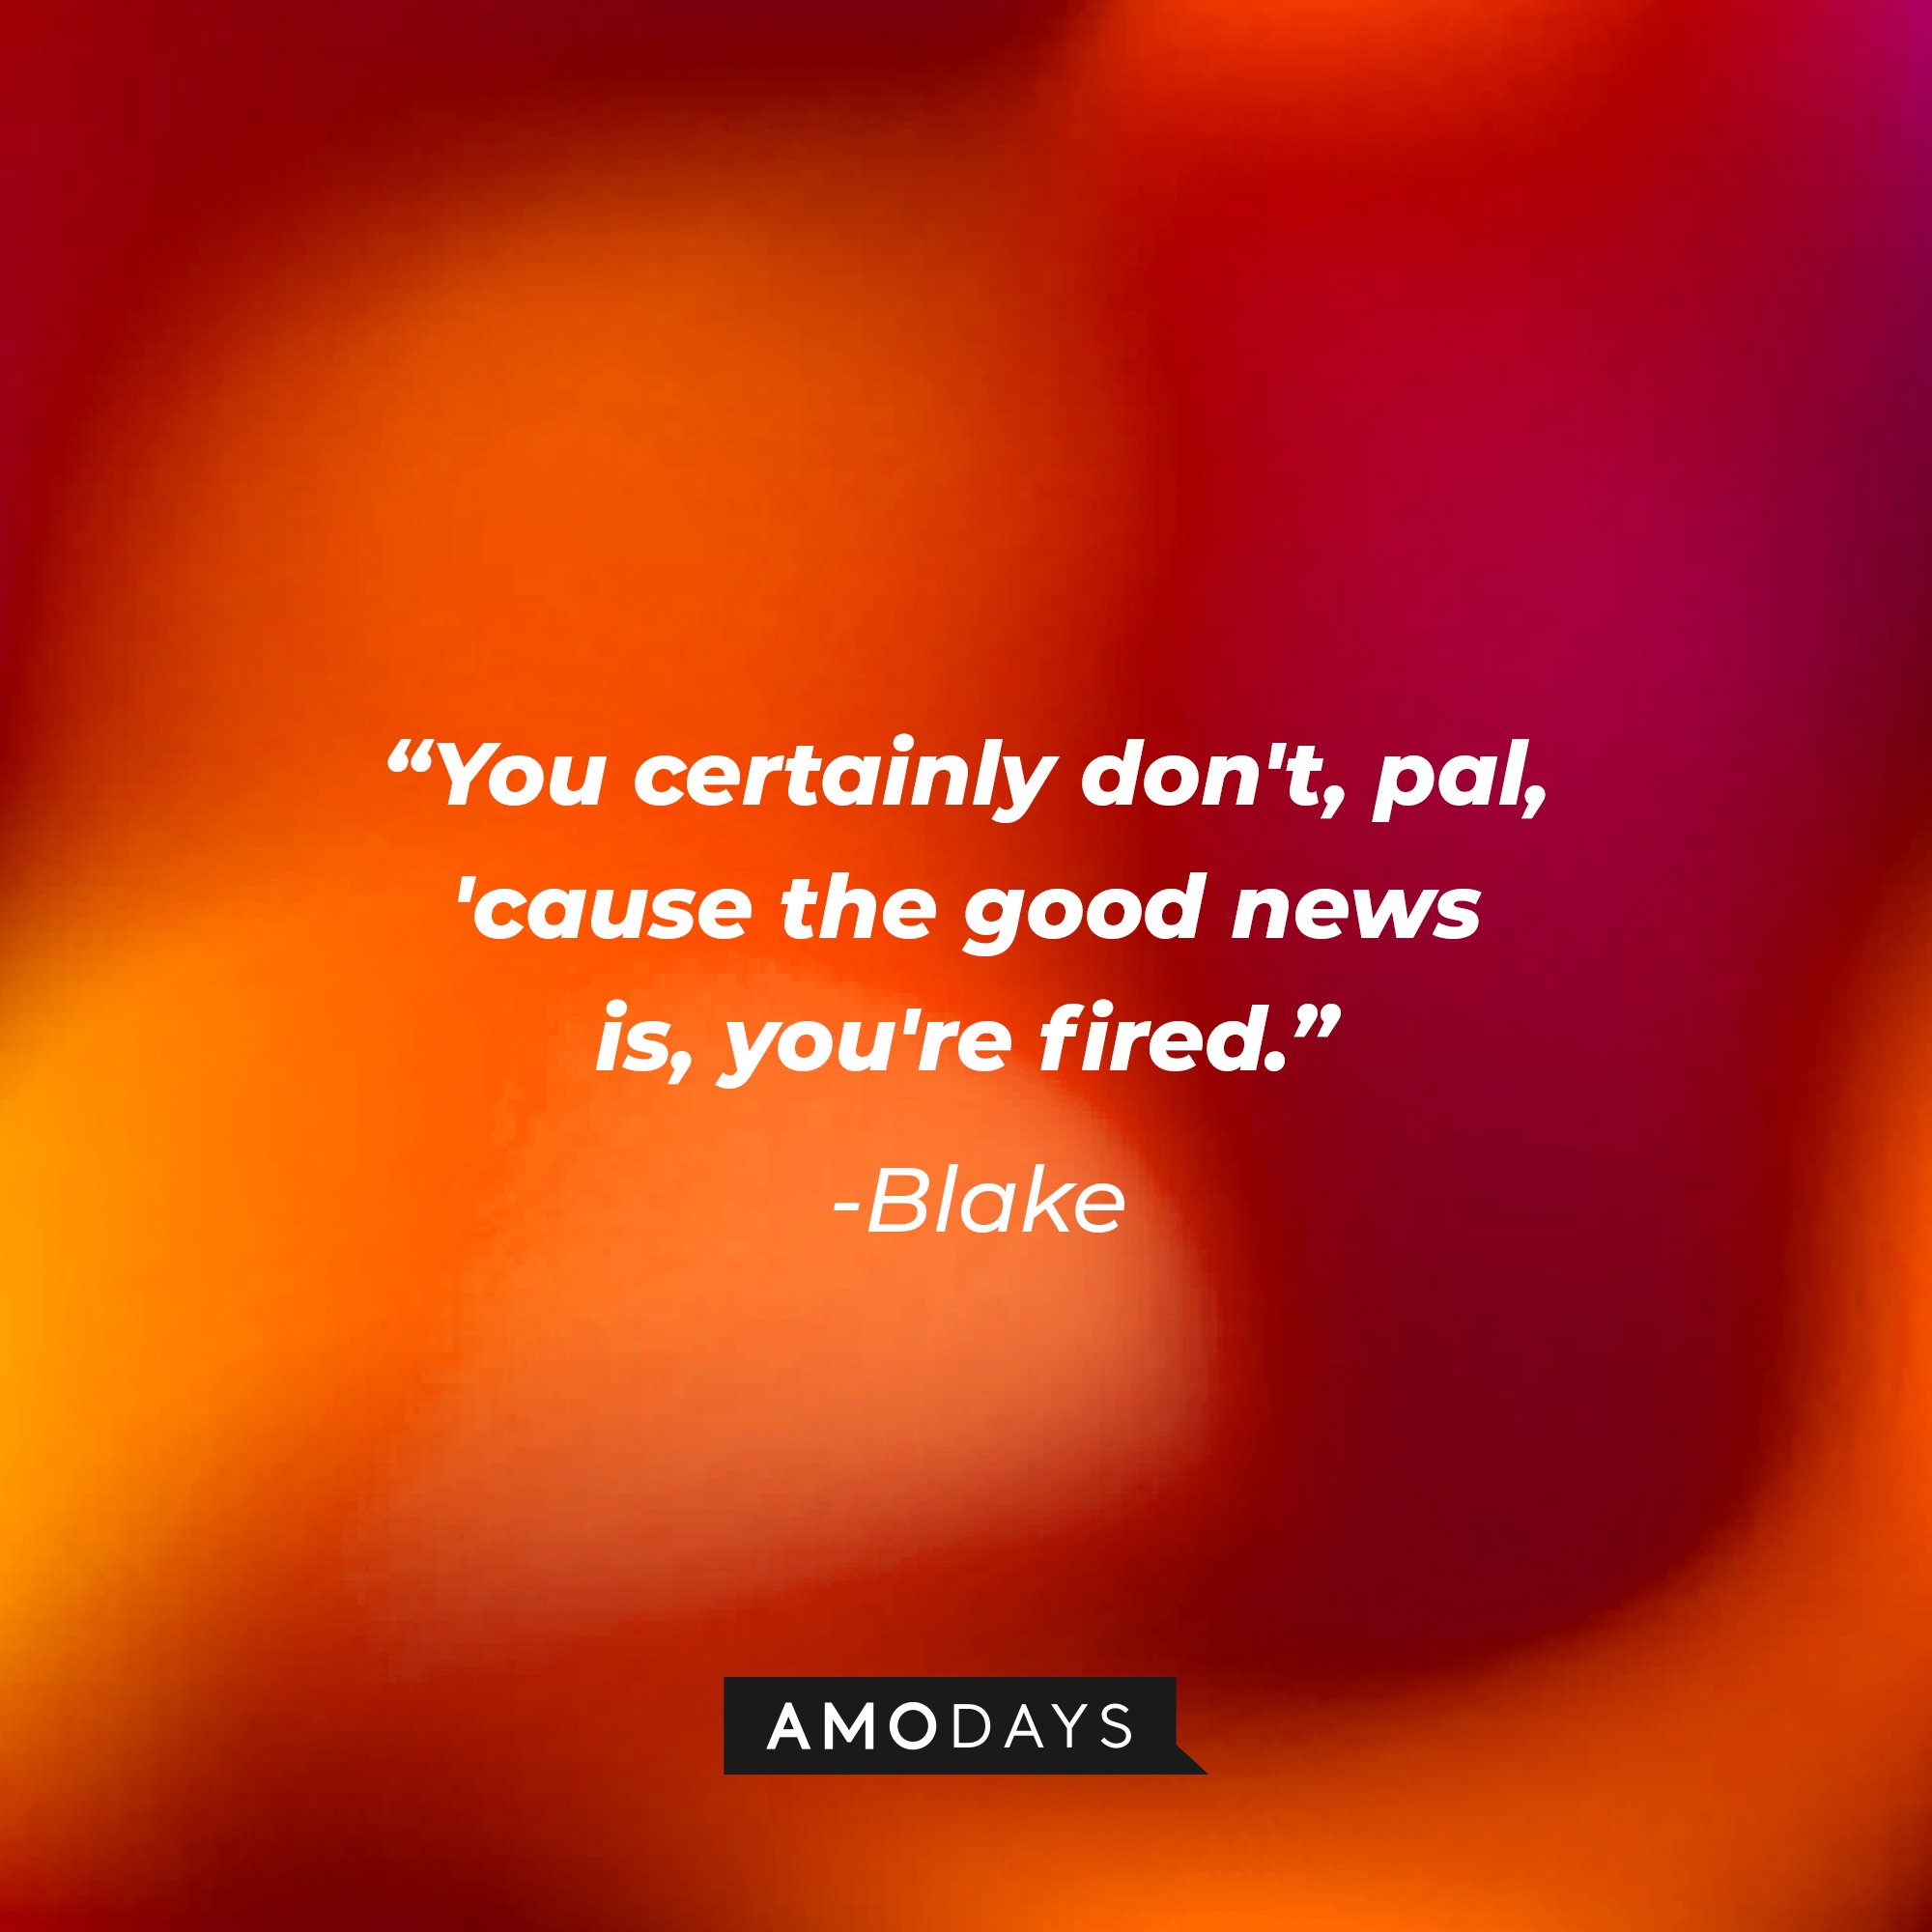 Blake's quote: "You certainly don't, pal, 'cause the good news is, you're fired." | Image: AmoDays